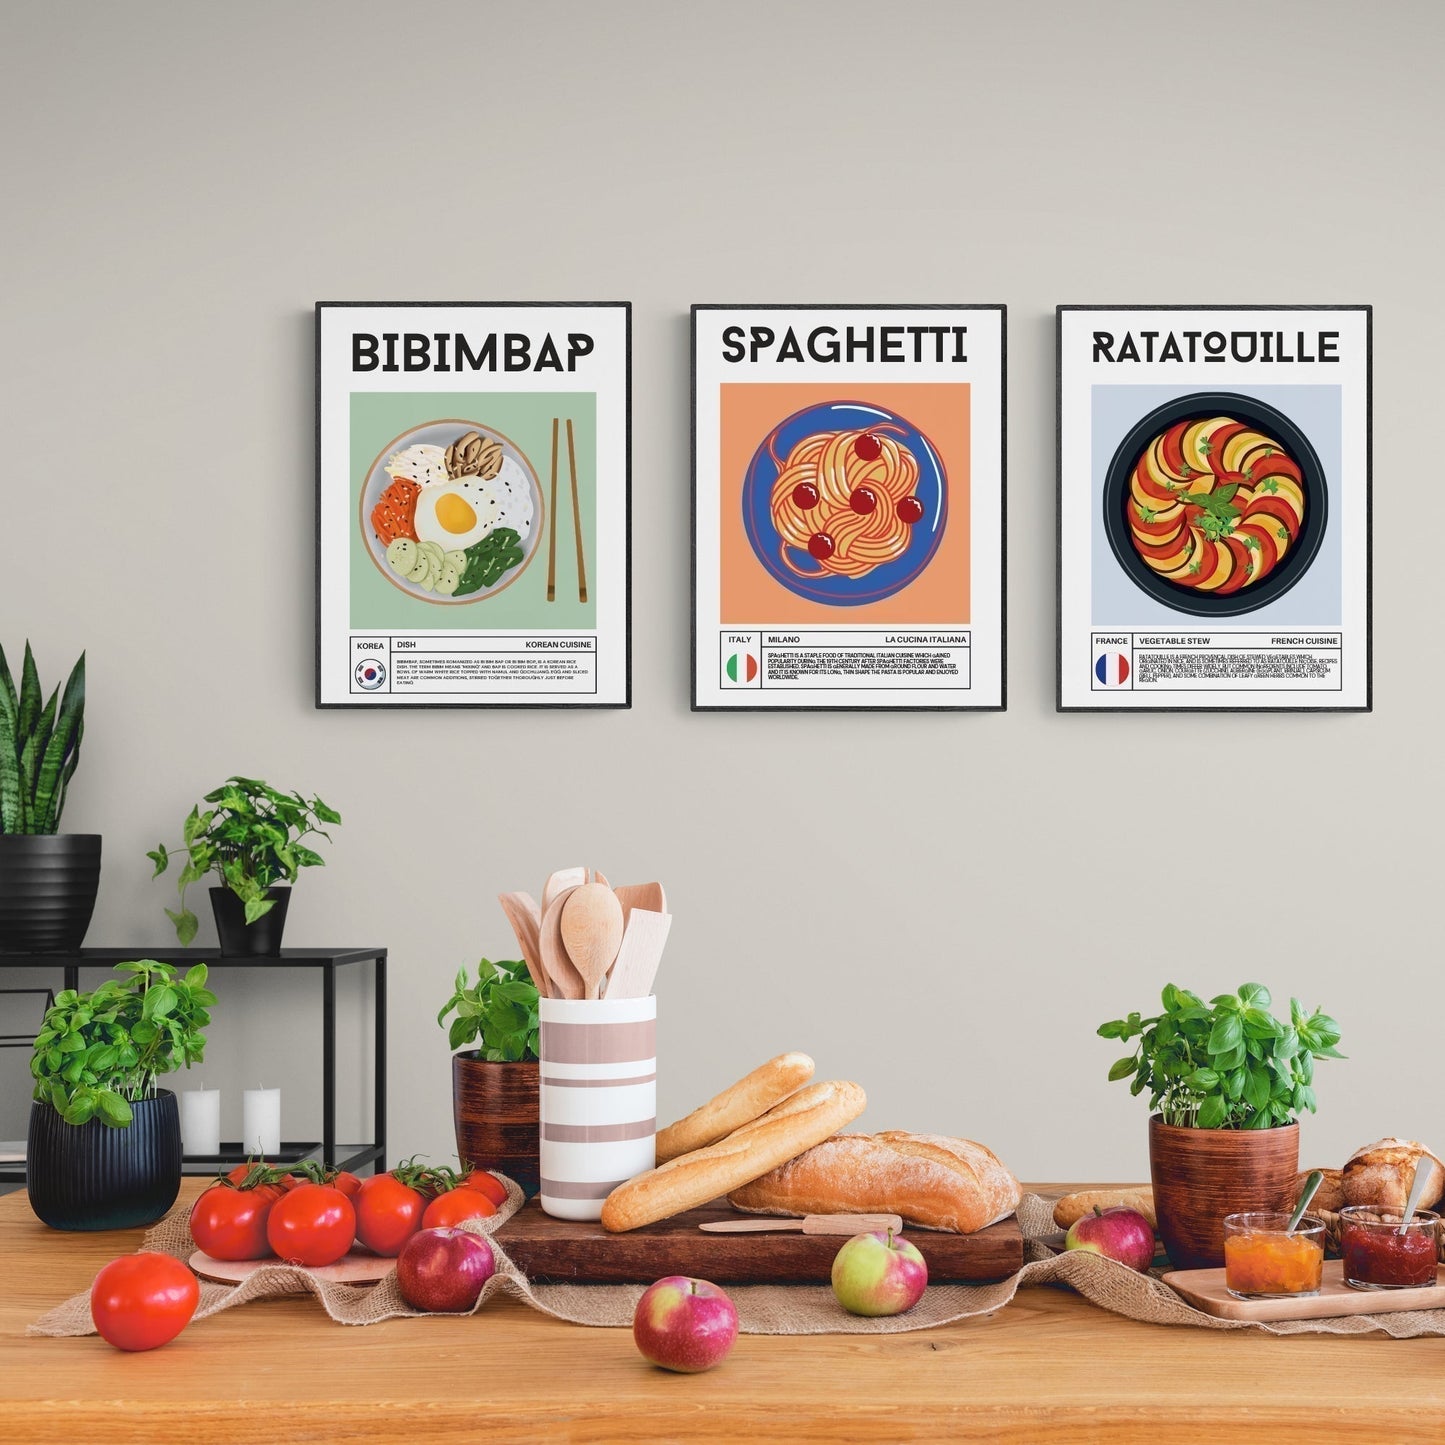 Discover a world of delicious cuisine with our RACLETTE Wall Art Poster. Decorate your kitchen with this colorful and modern poster featuring famous meals, retro food art, and a world cuisine guide. Perfect for food lovers and a great addition to any kitchen decor.